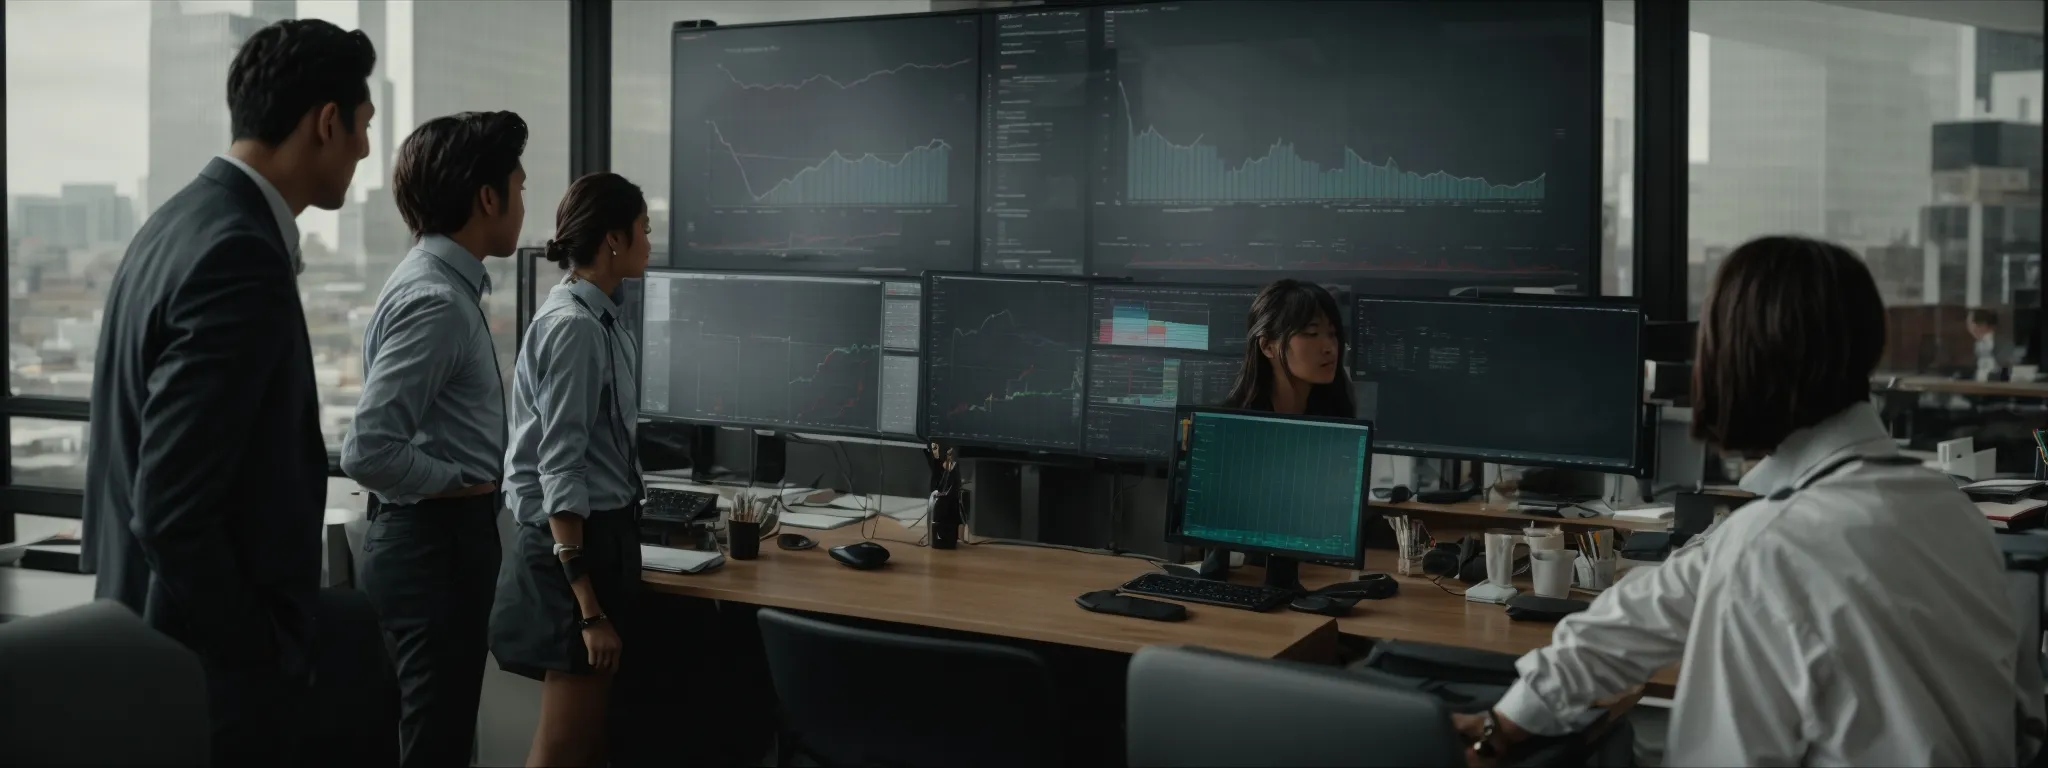 a group of people analyzing graphs and charts on a large monitor in a modern office.